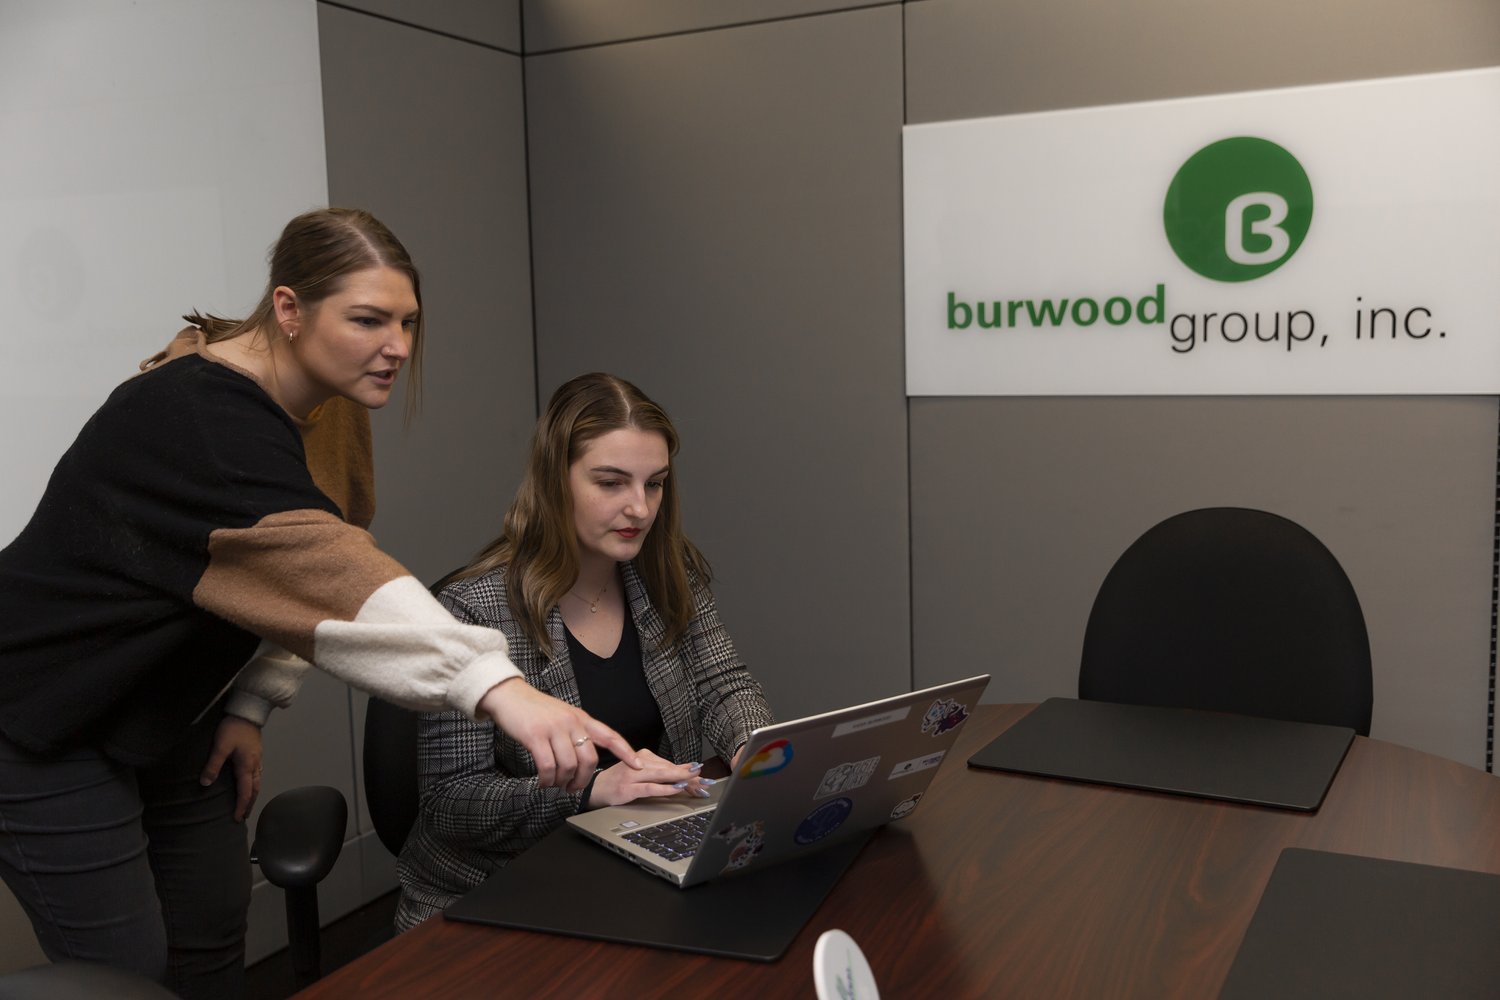 About Burwood Group, Inc